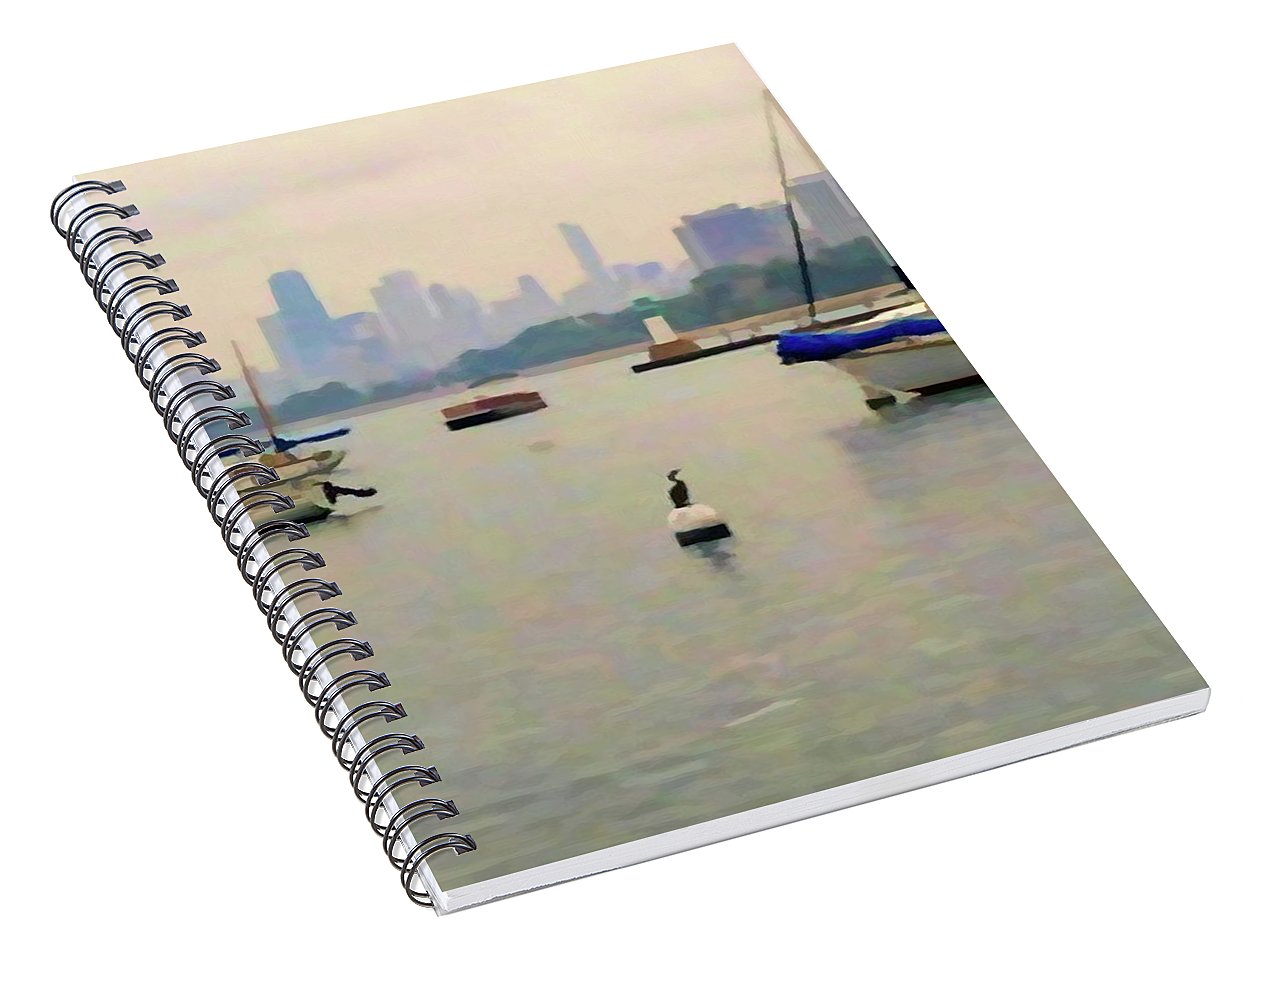 Lake By The City - Spiral Notebook